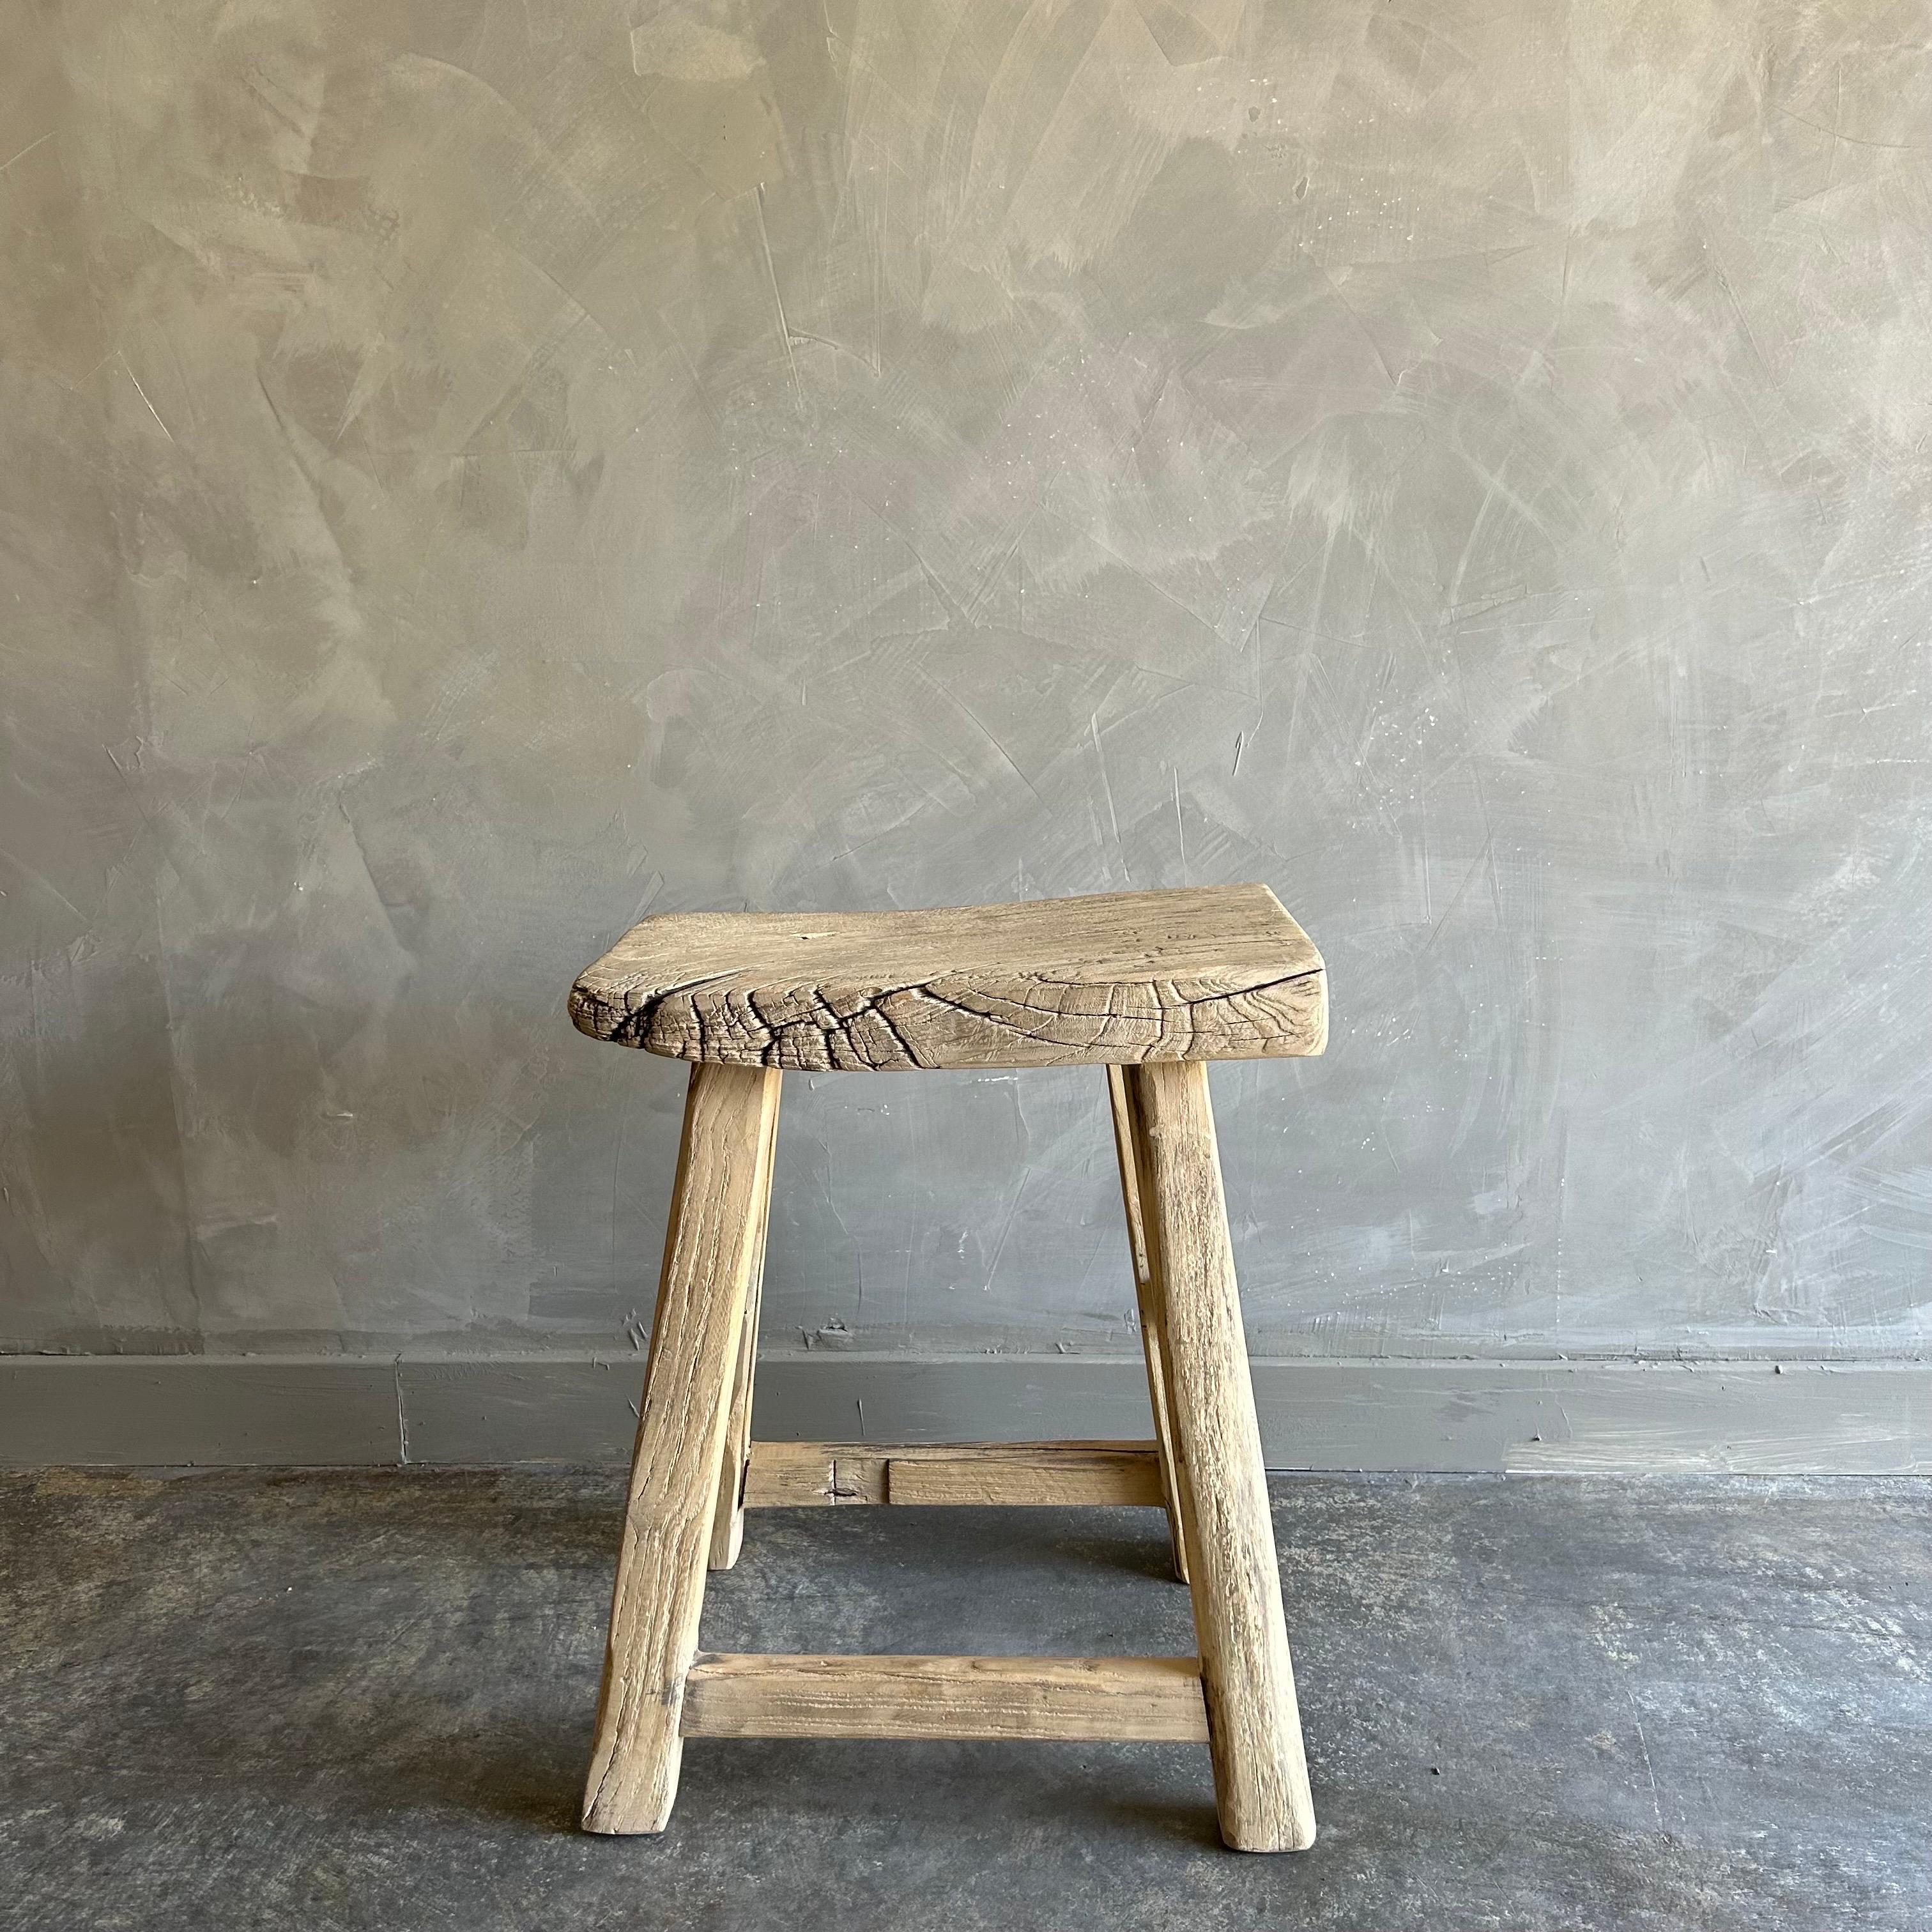 Welcome to bloomhomeinc we stock over 2000 items, please scroll down and click view sellers other items to see more!
Size:  16.5”w x 13”d x 20”h
SD:9”
Vintage Antique Elm Wood stool made from vintage reclaimed elm wood. Beautiful antique patina,